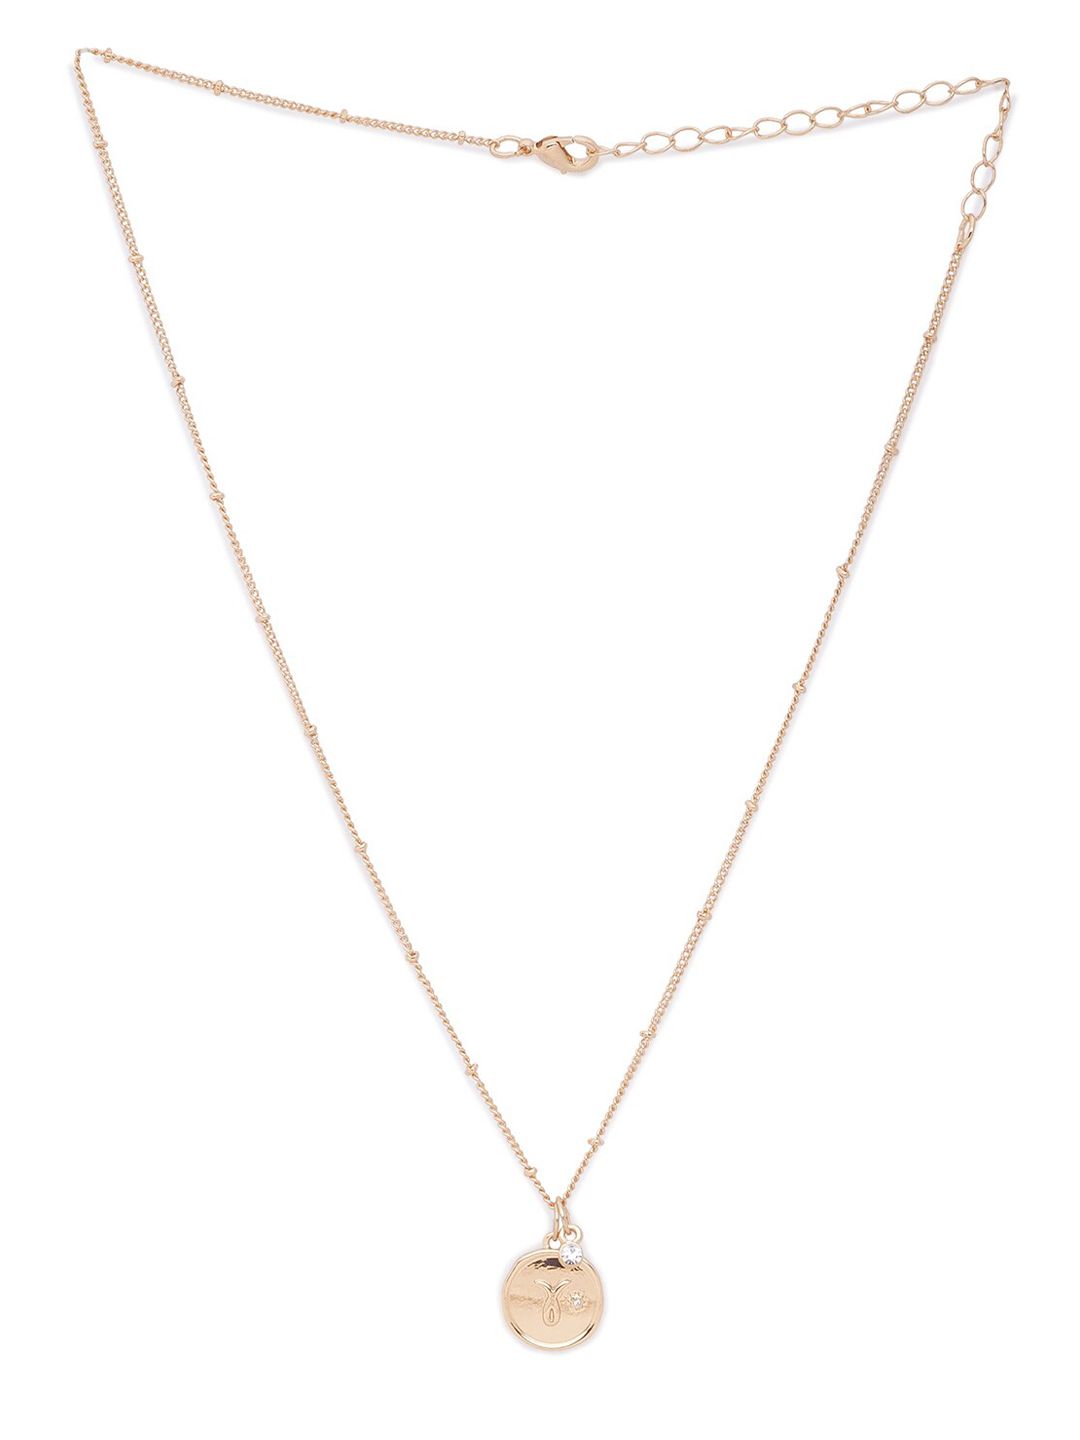 Lilly & sparkle Women Gold-Toned & White Necklace Price in India